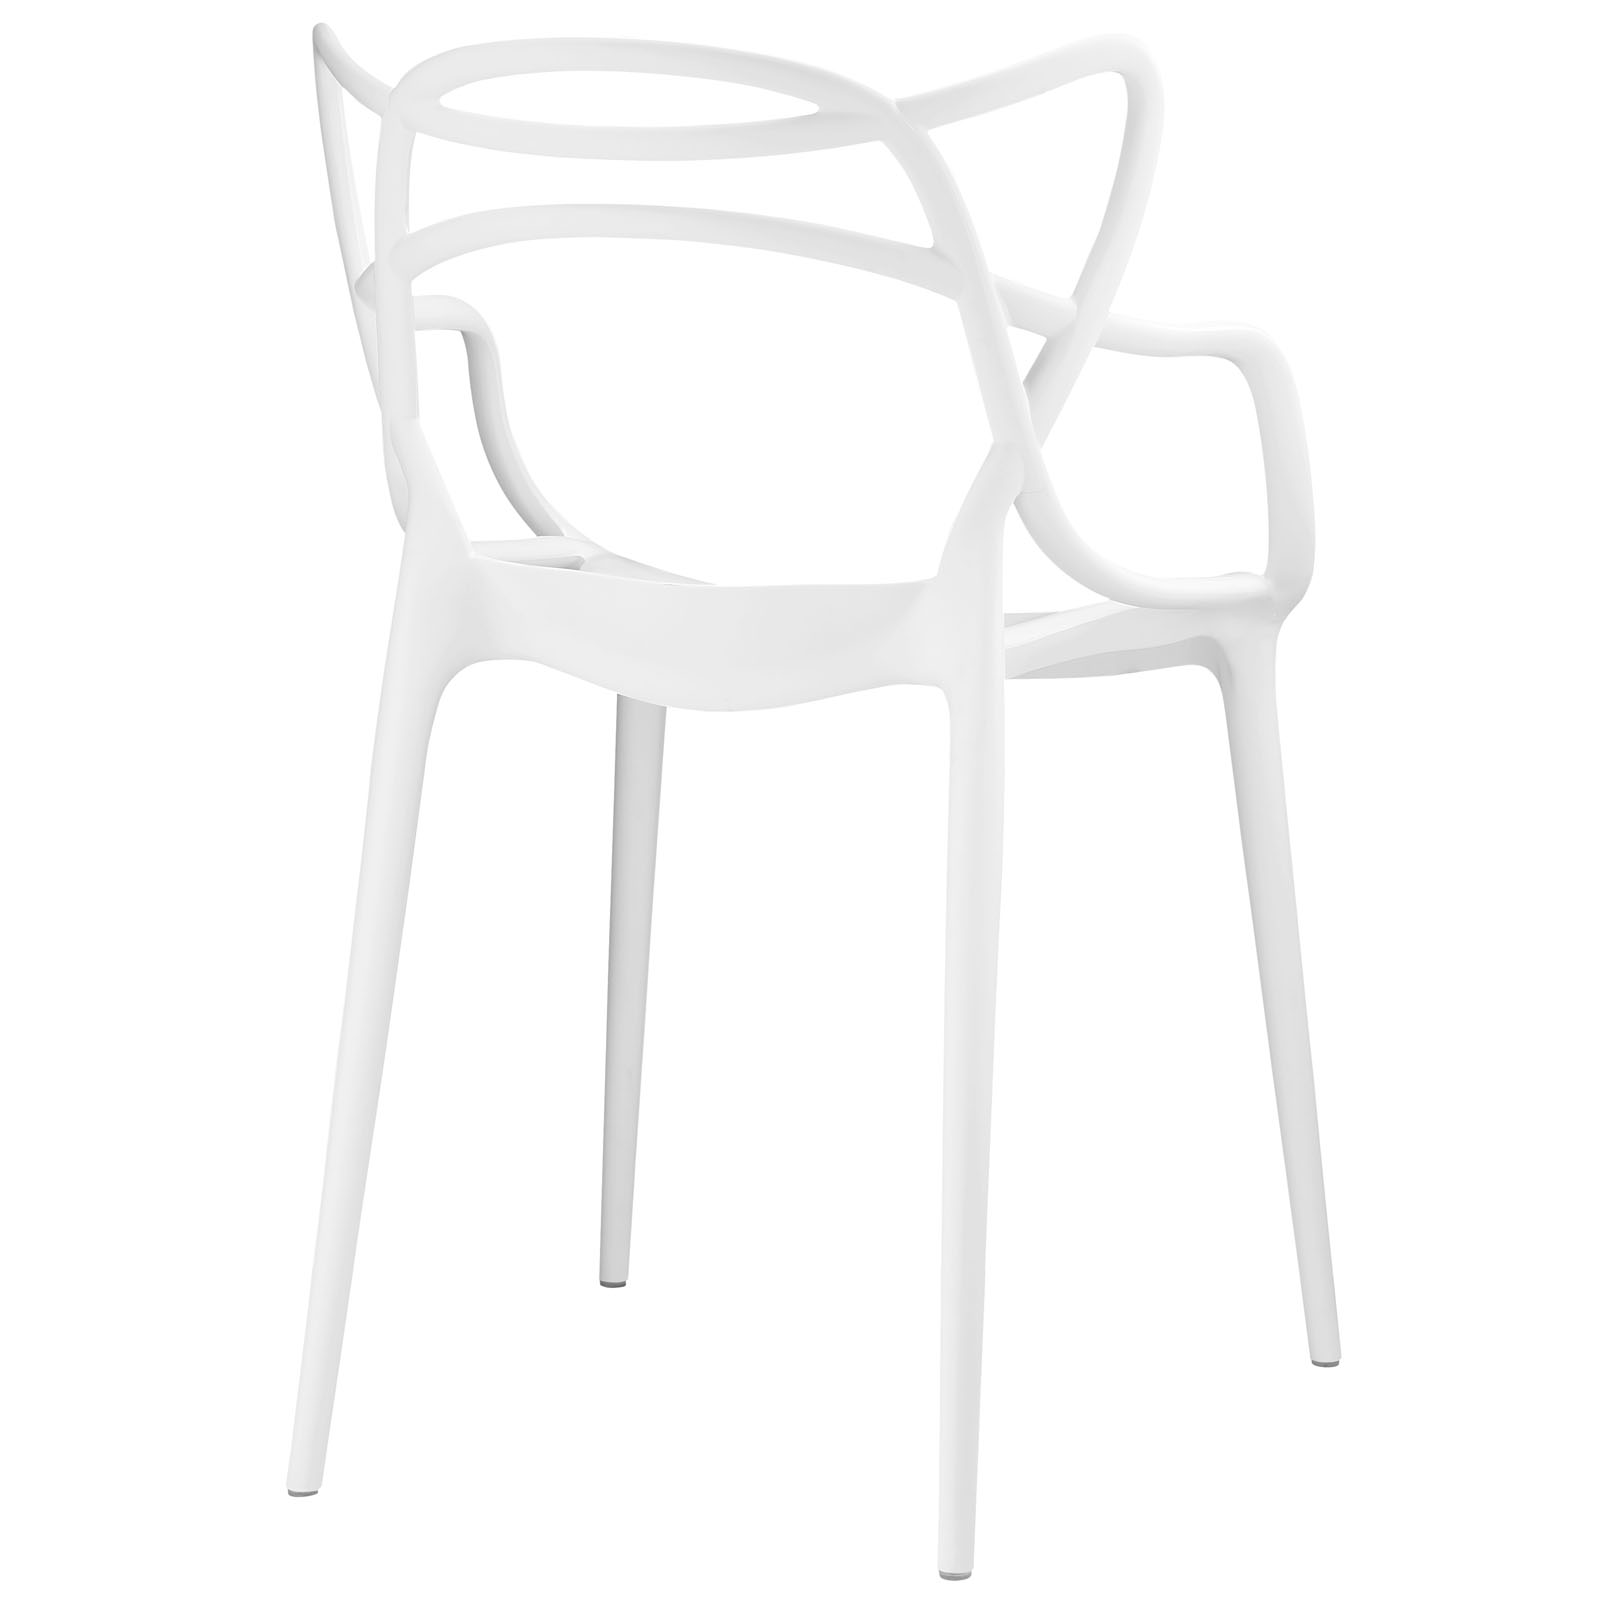 Modern Contemporary Urban Design Outdoor Kitchen Room Dining Chair Set ( Set of 4), White, Plastic - image 4 of 4